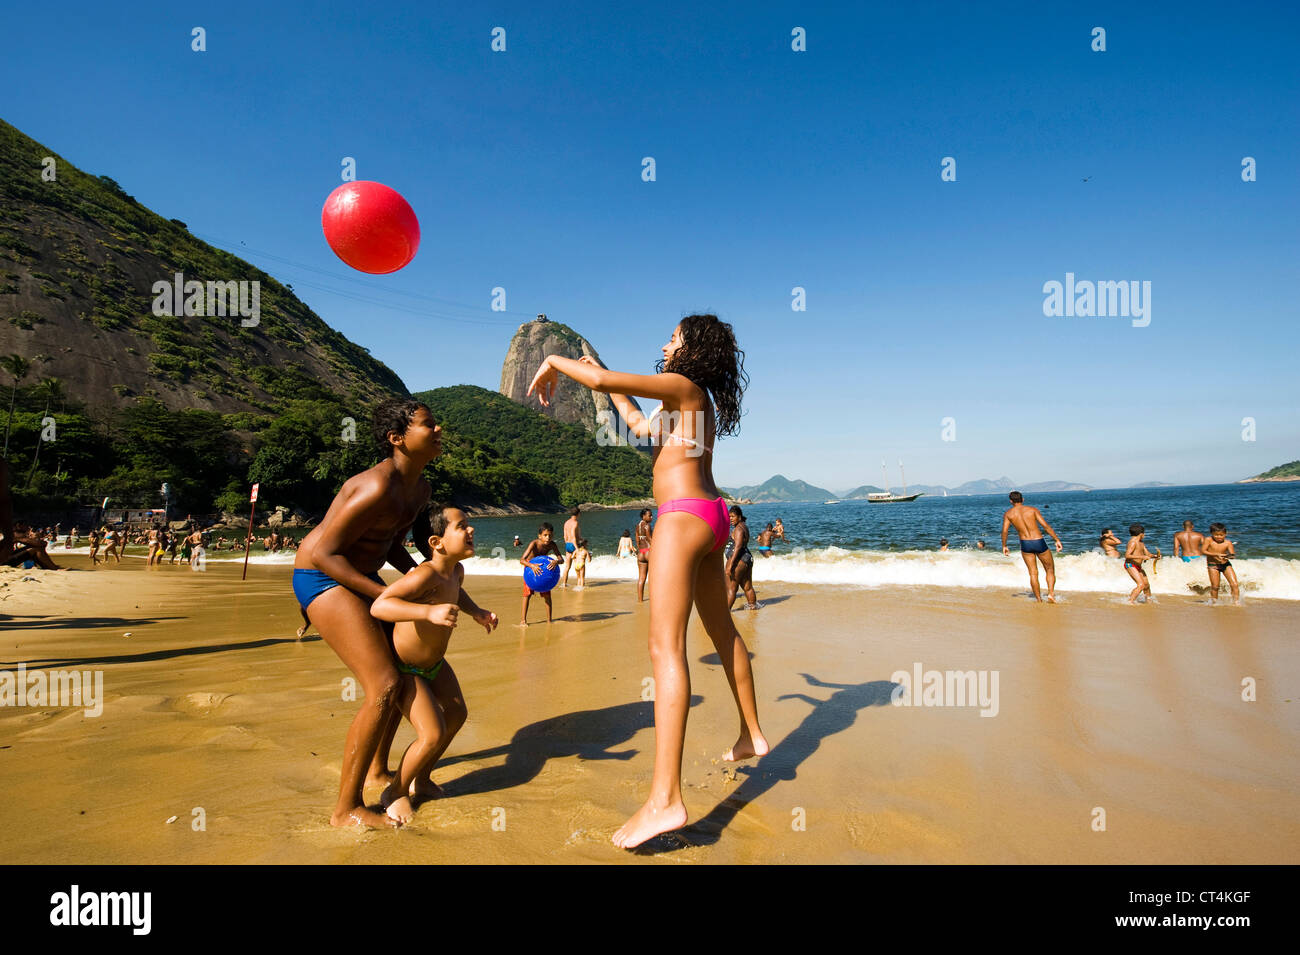 Brazil, Rio de Janeiro, Urca, families playing at the beach with Sugar Loaf in background Stock Photo